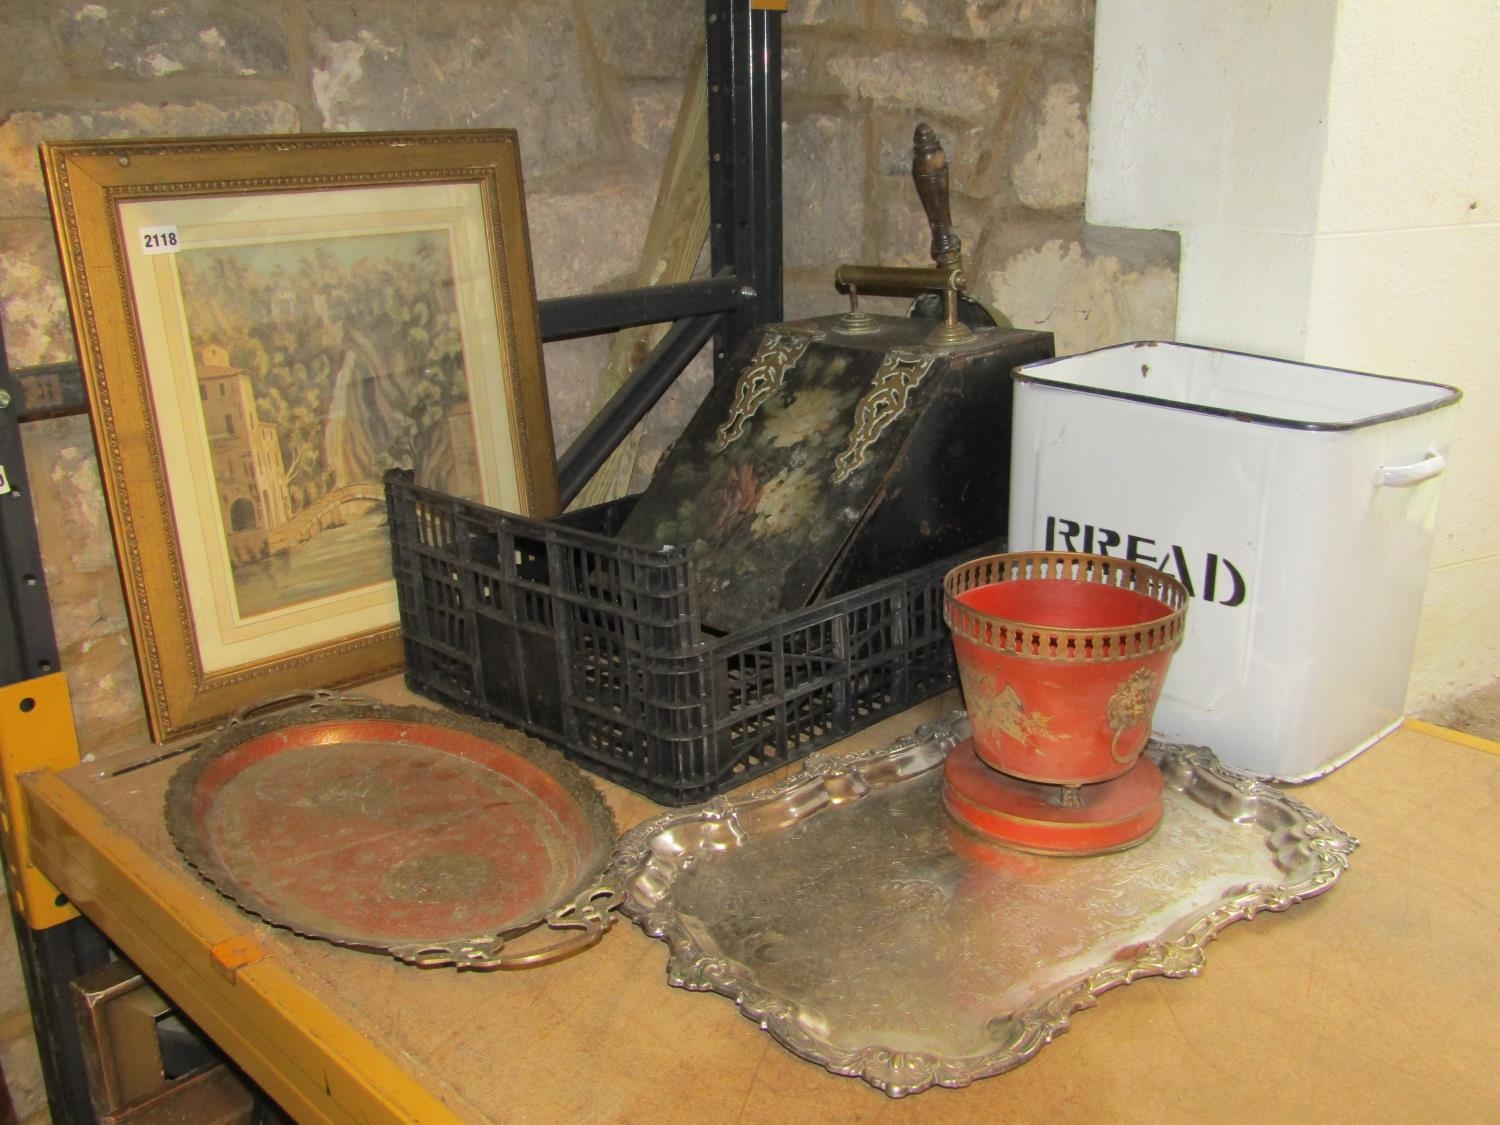 One lot of miscellaneous items to include a vintage cream enamel bread bin, japanned tin coal